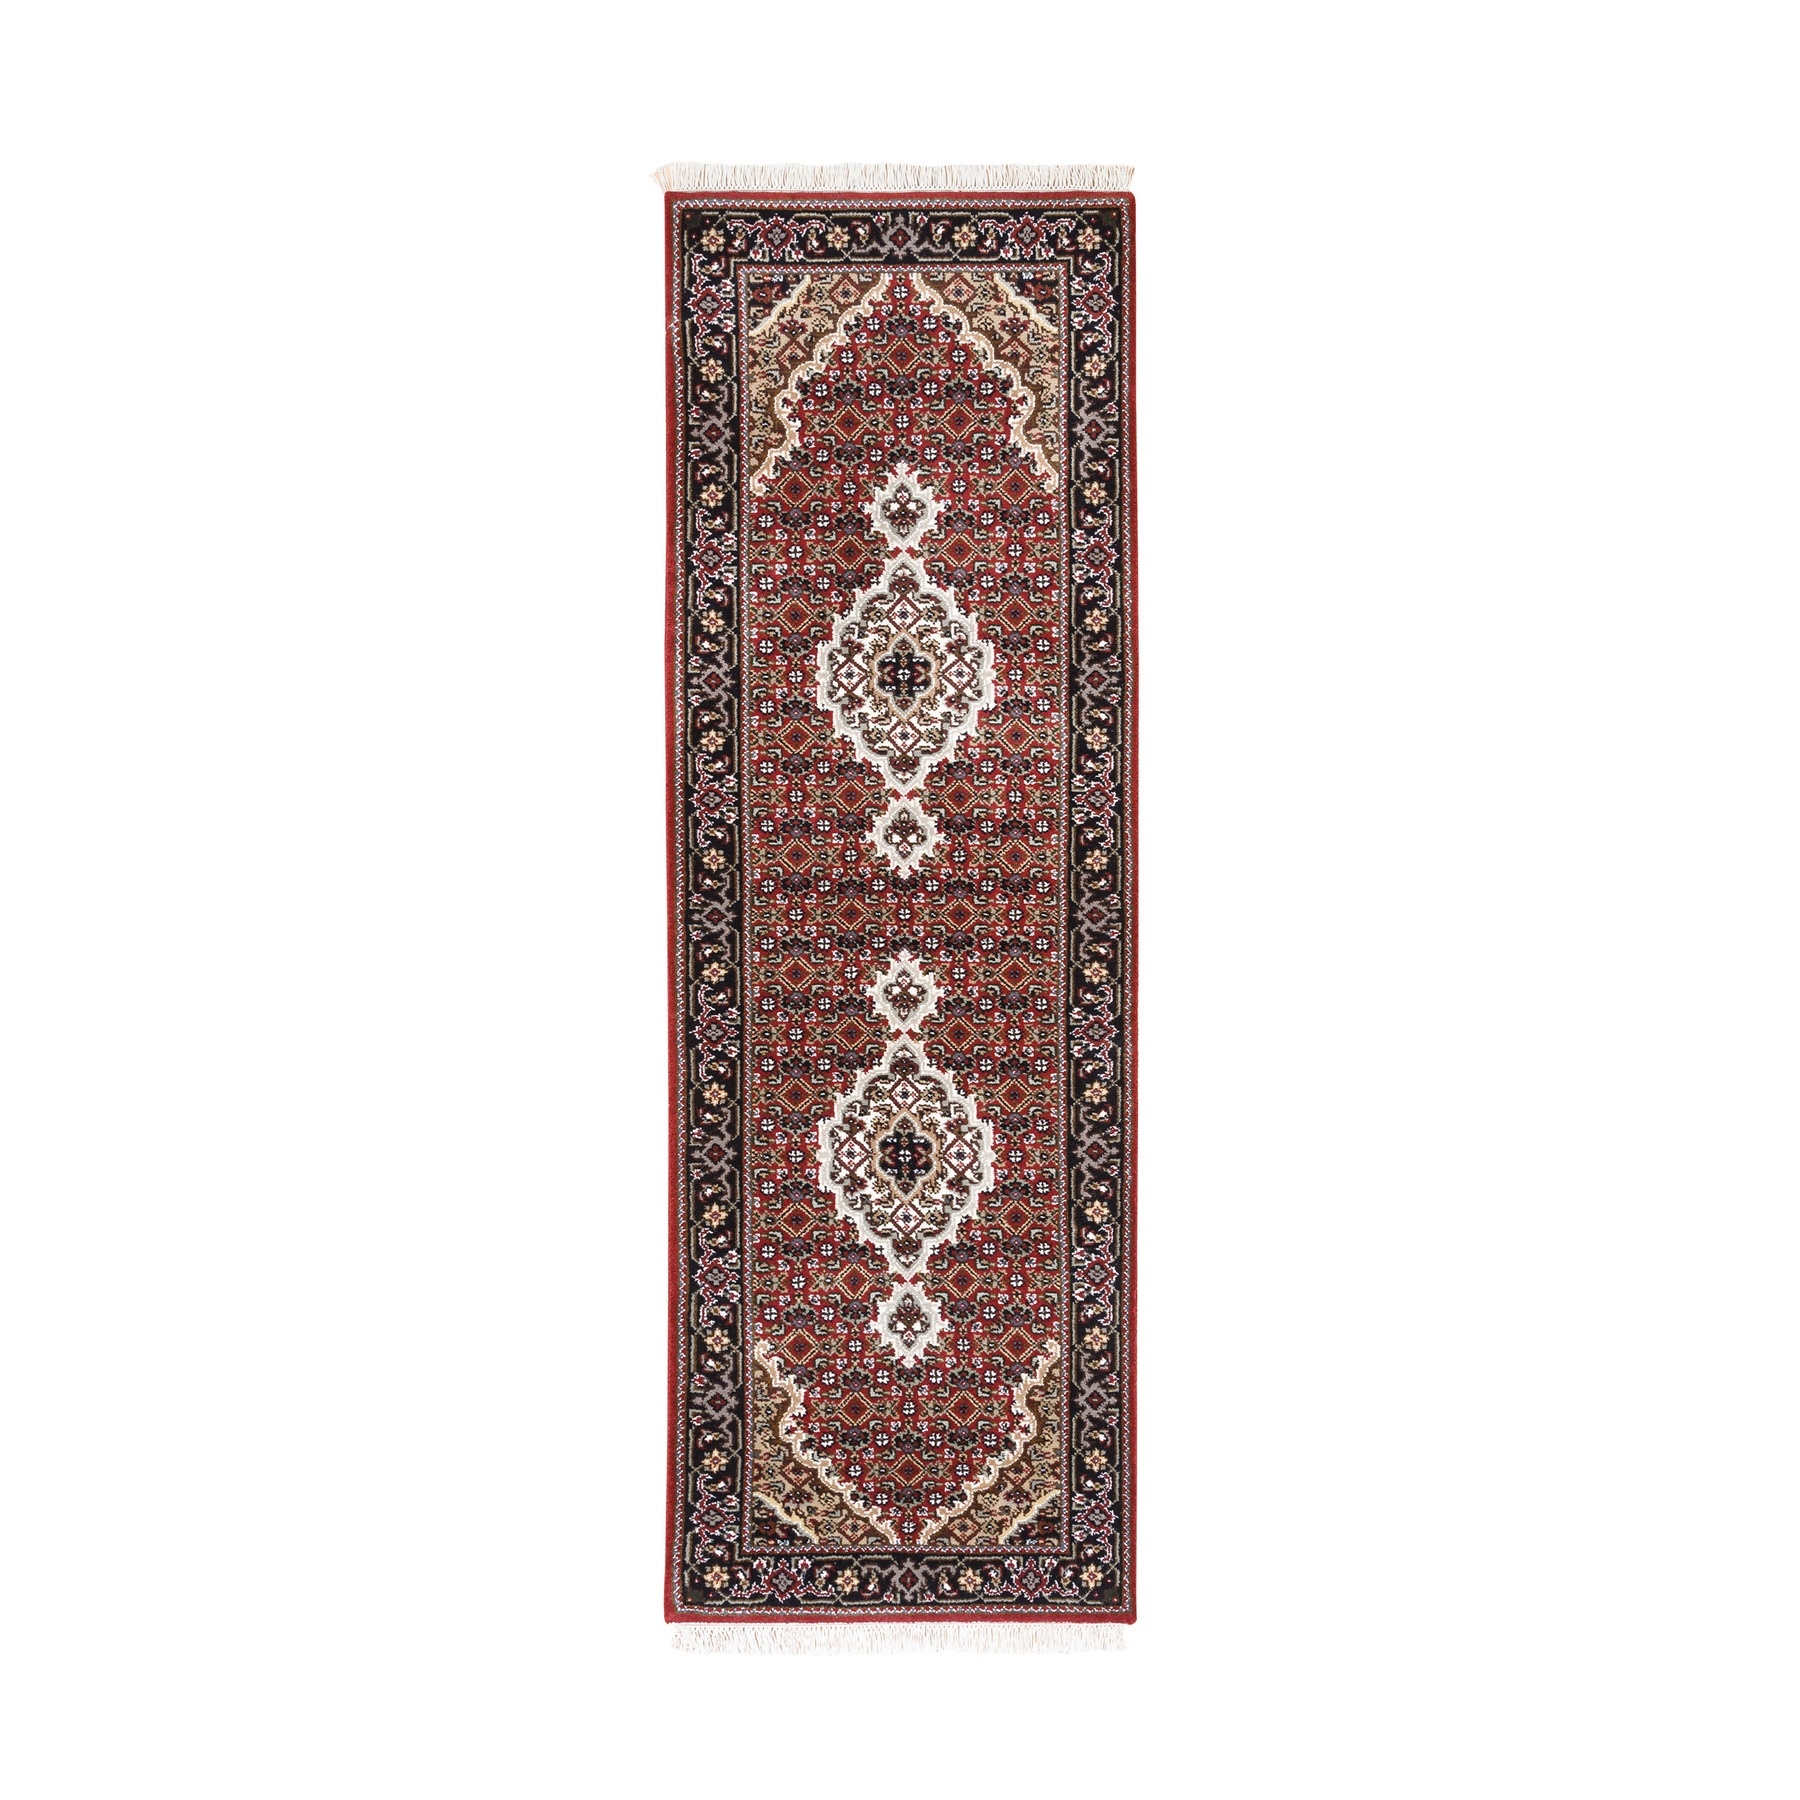 Pirniakan Collection Hand Knotted Red Rug No: 1124924